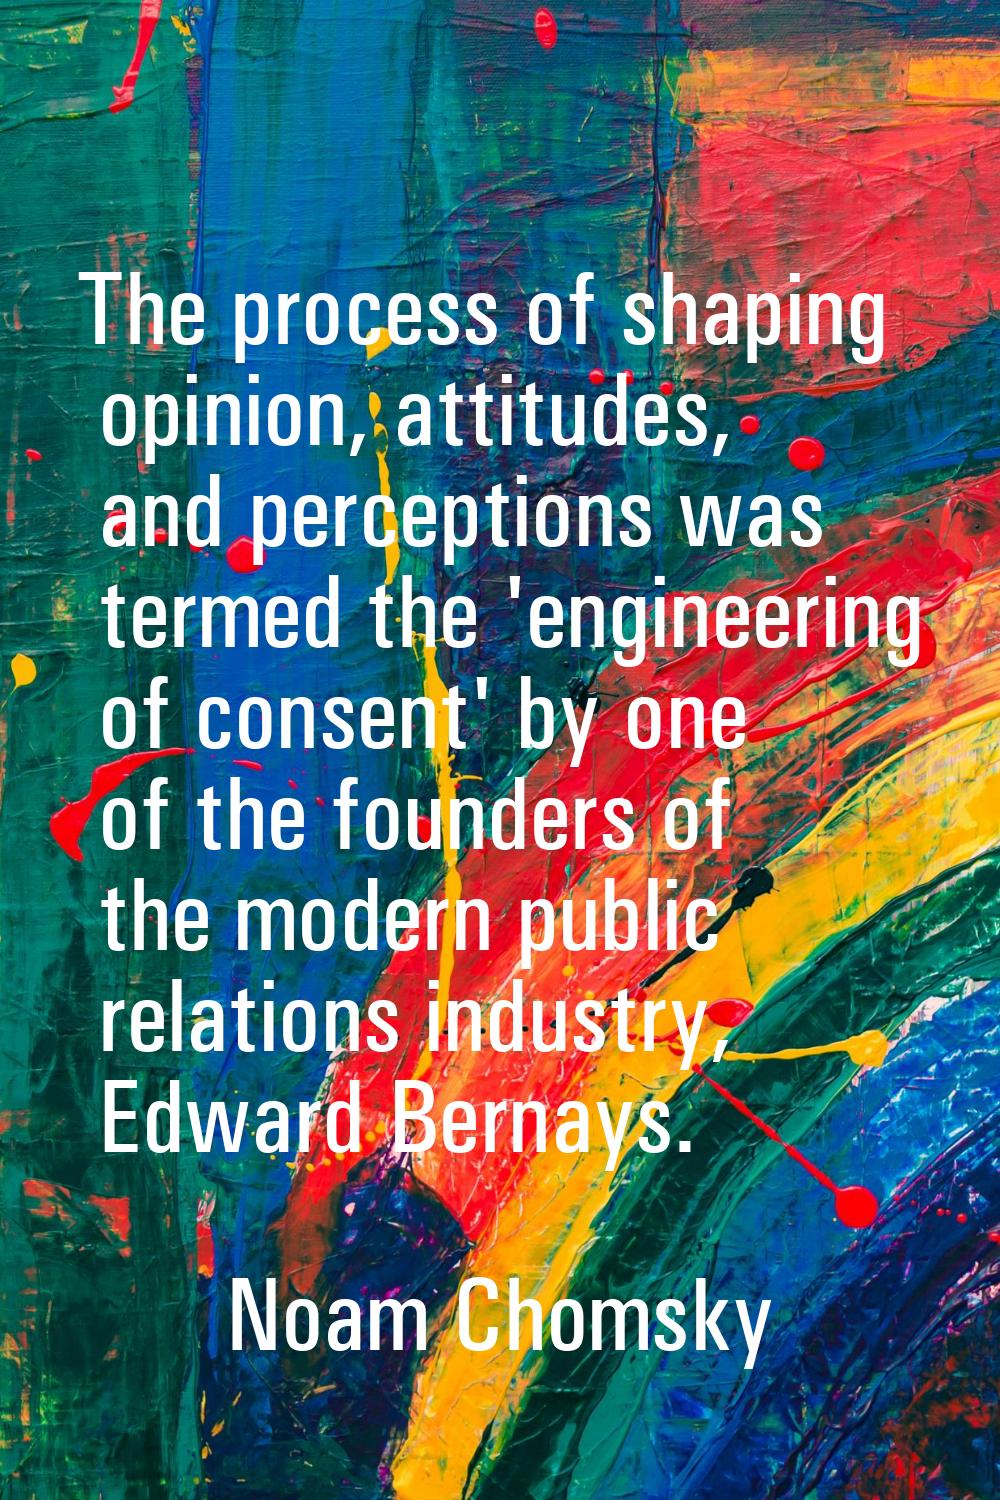 The process of shaping opinion, attitudes, and perceptions was termed the 'engineering of consent' 